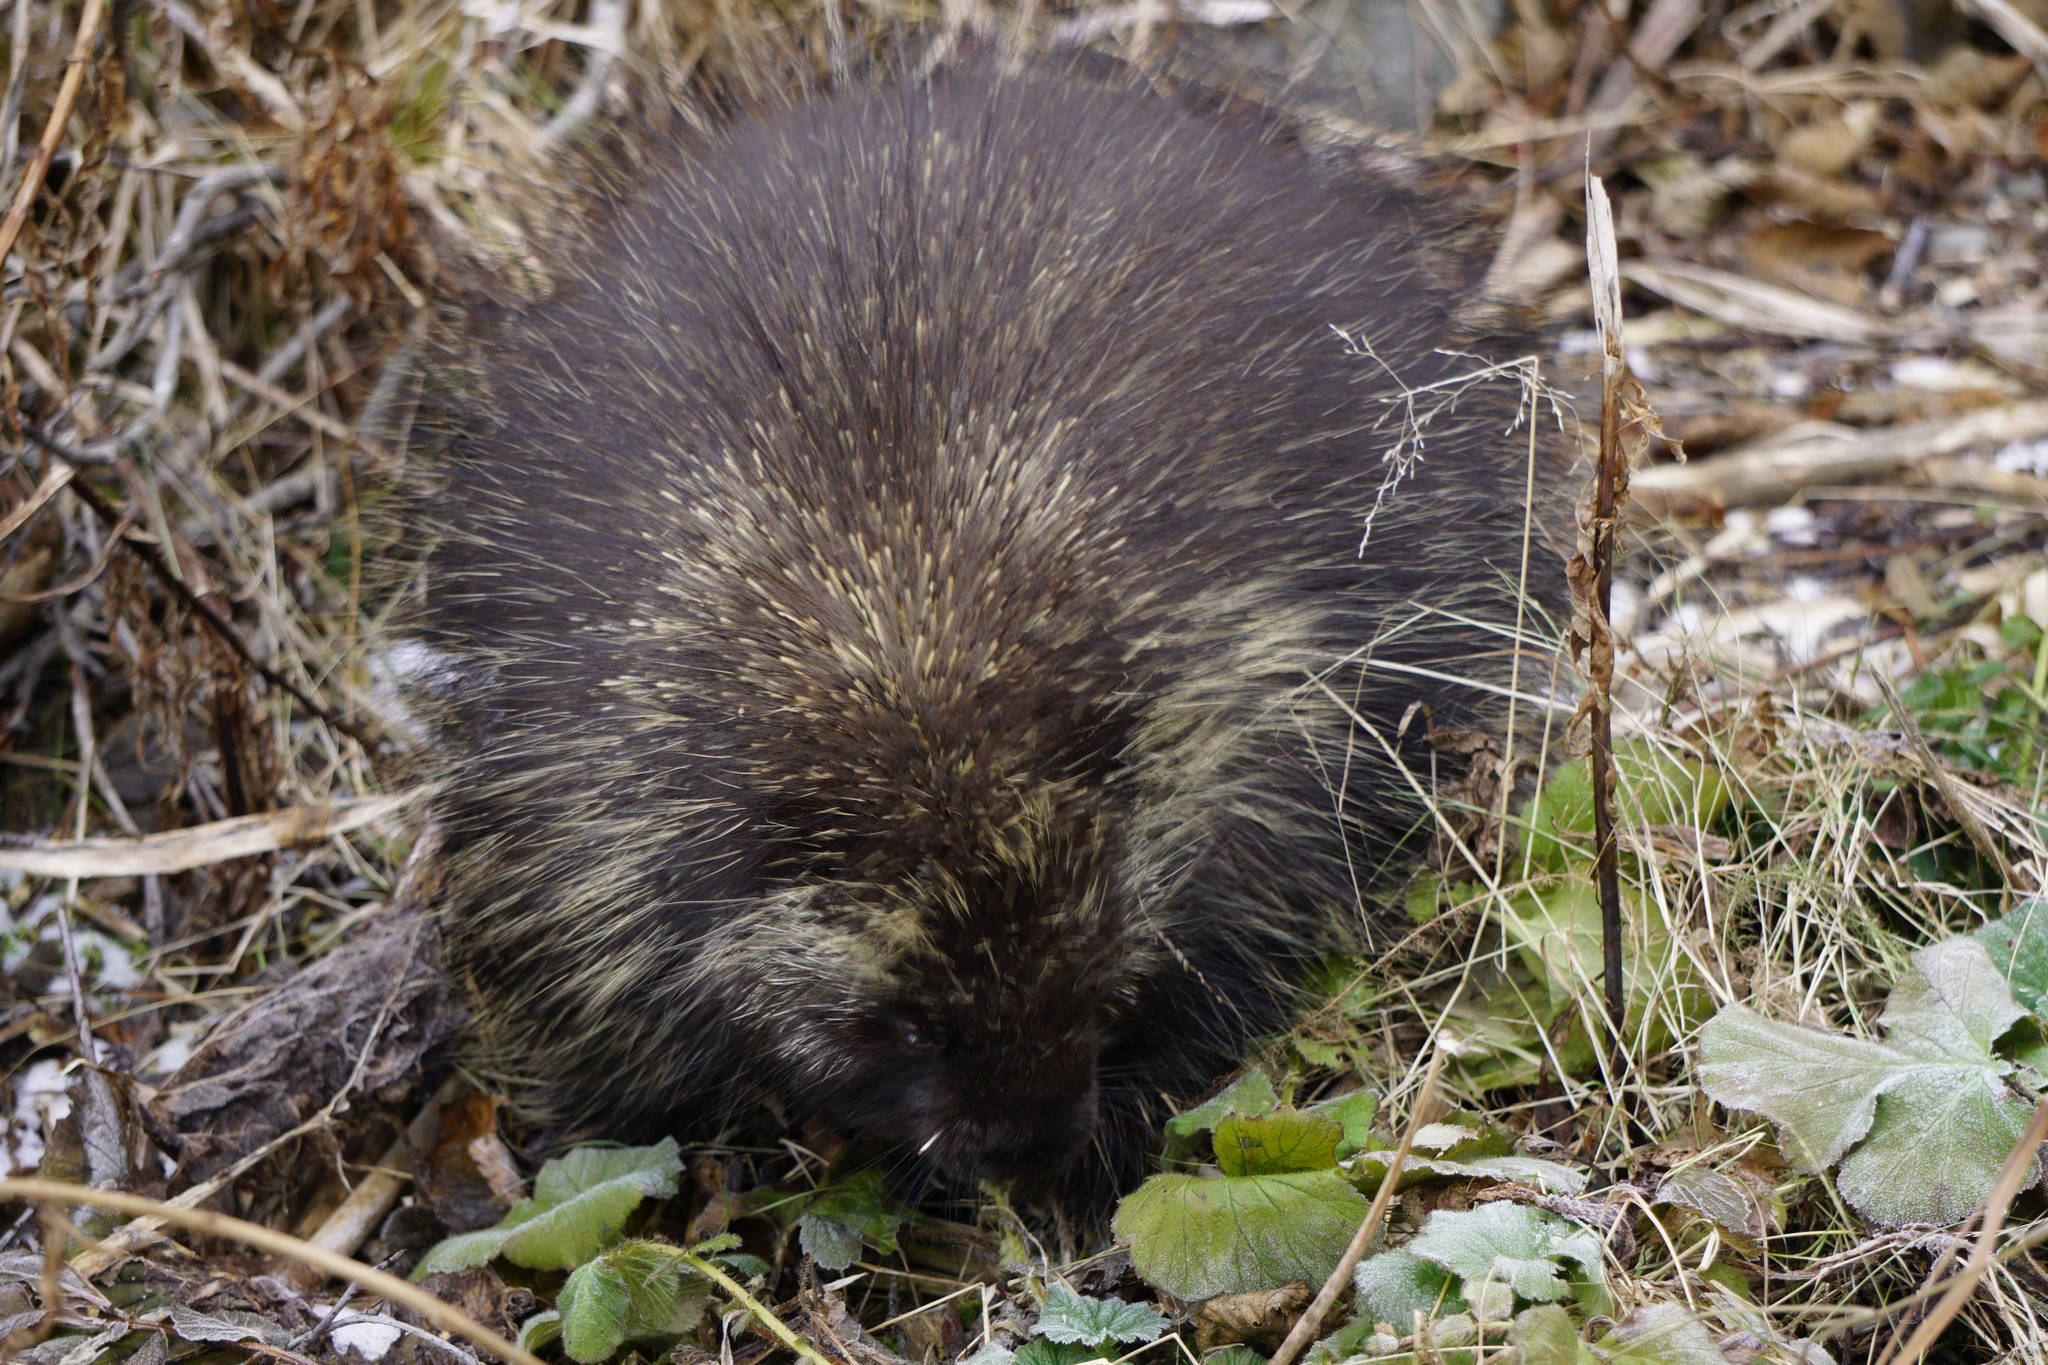 A porcupine feeds by the side of a driveway off Diamond Ridge Road on Nov. 10, 2018, in Homer, Alaska. (Photo by Michael Armstrong/Homer News)